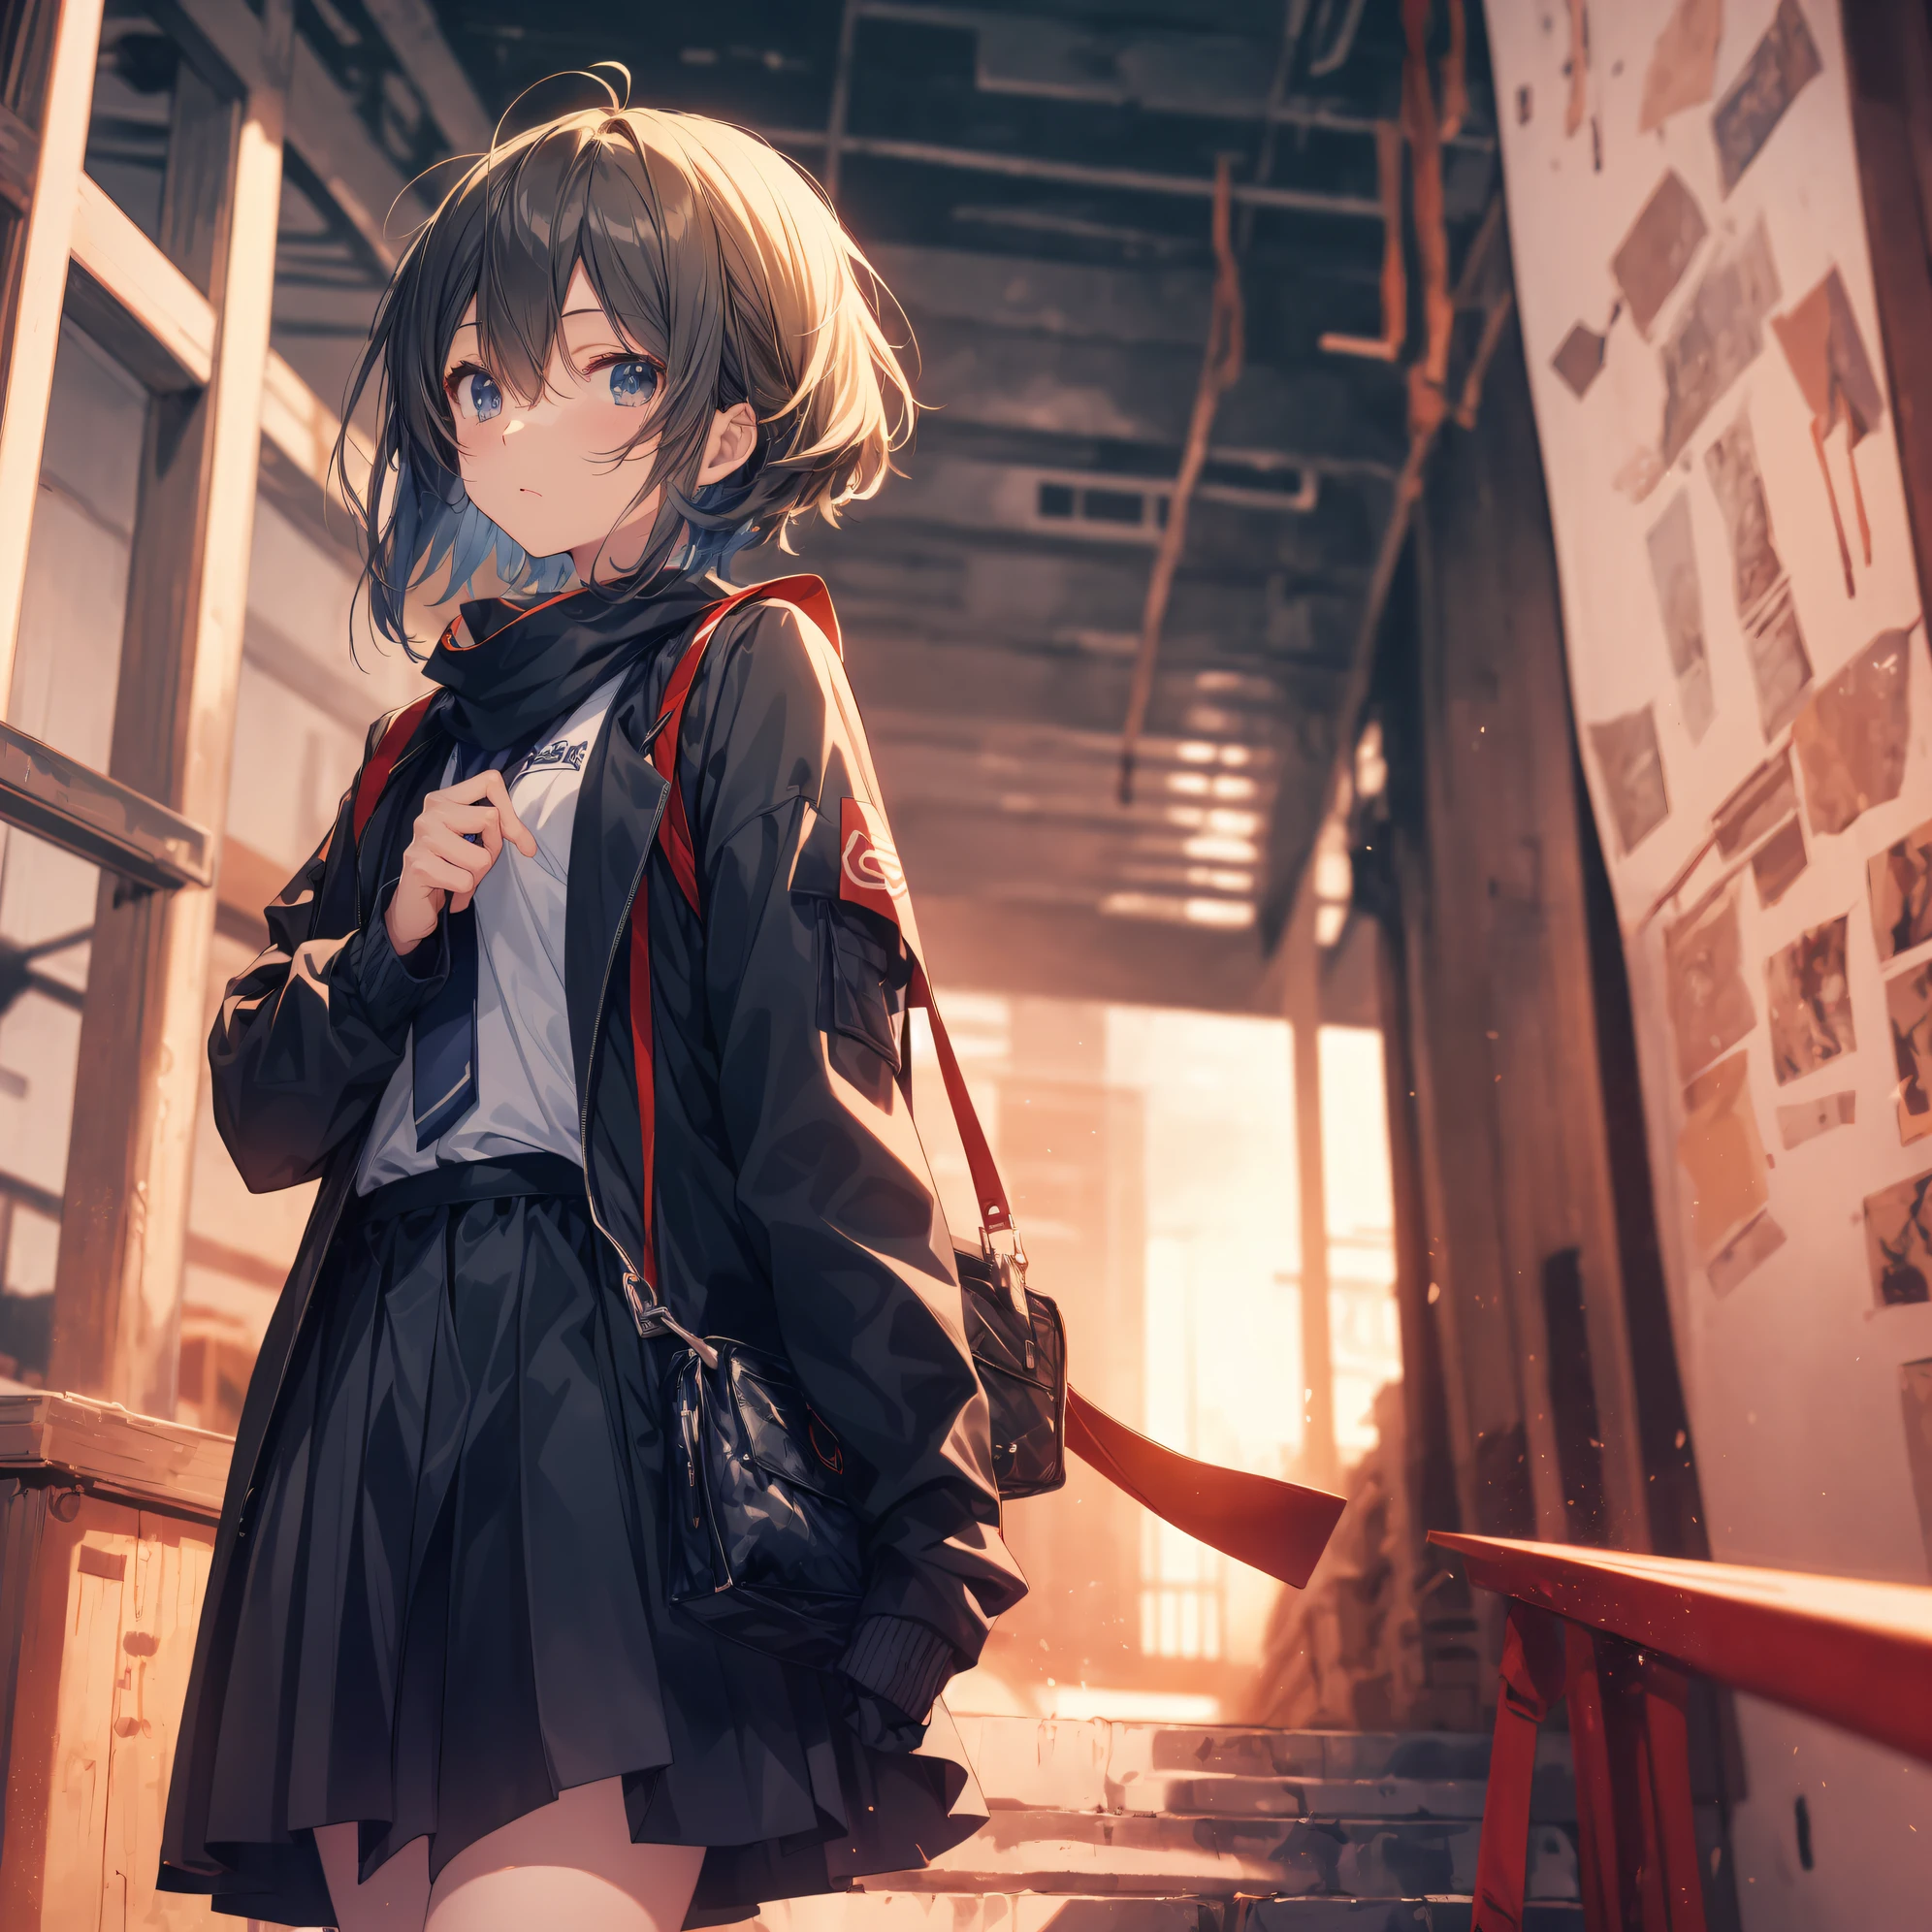 Top quality by Moe creator god, Ultra-detailed, anime moe art style,Best Anime 8K Konachan Wallpapers,Pixiv Contest Winner,Perfect Anatomy, BREAK,(Draw a girl sleepily walking to school. ),BREAK, 1girl in, (Solo,,,13years:1.3),a junior high school student, Androgynous attraction, (messy very short hair), Full limbs, complete fingers, flat chest, Small butt, groin, Small eyes,Beautiful detailed black eyes, Well-proportioned iris and pupils, disgusted eye, Japan , Skirt, On the way to school. BREAK,High resolution,super detailed skin, The best lighting by professional artists, 8K, Illustration,